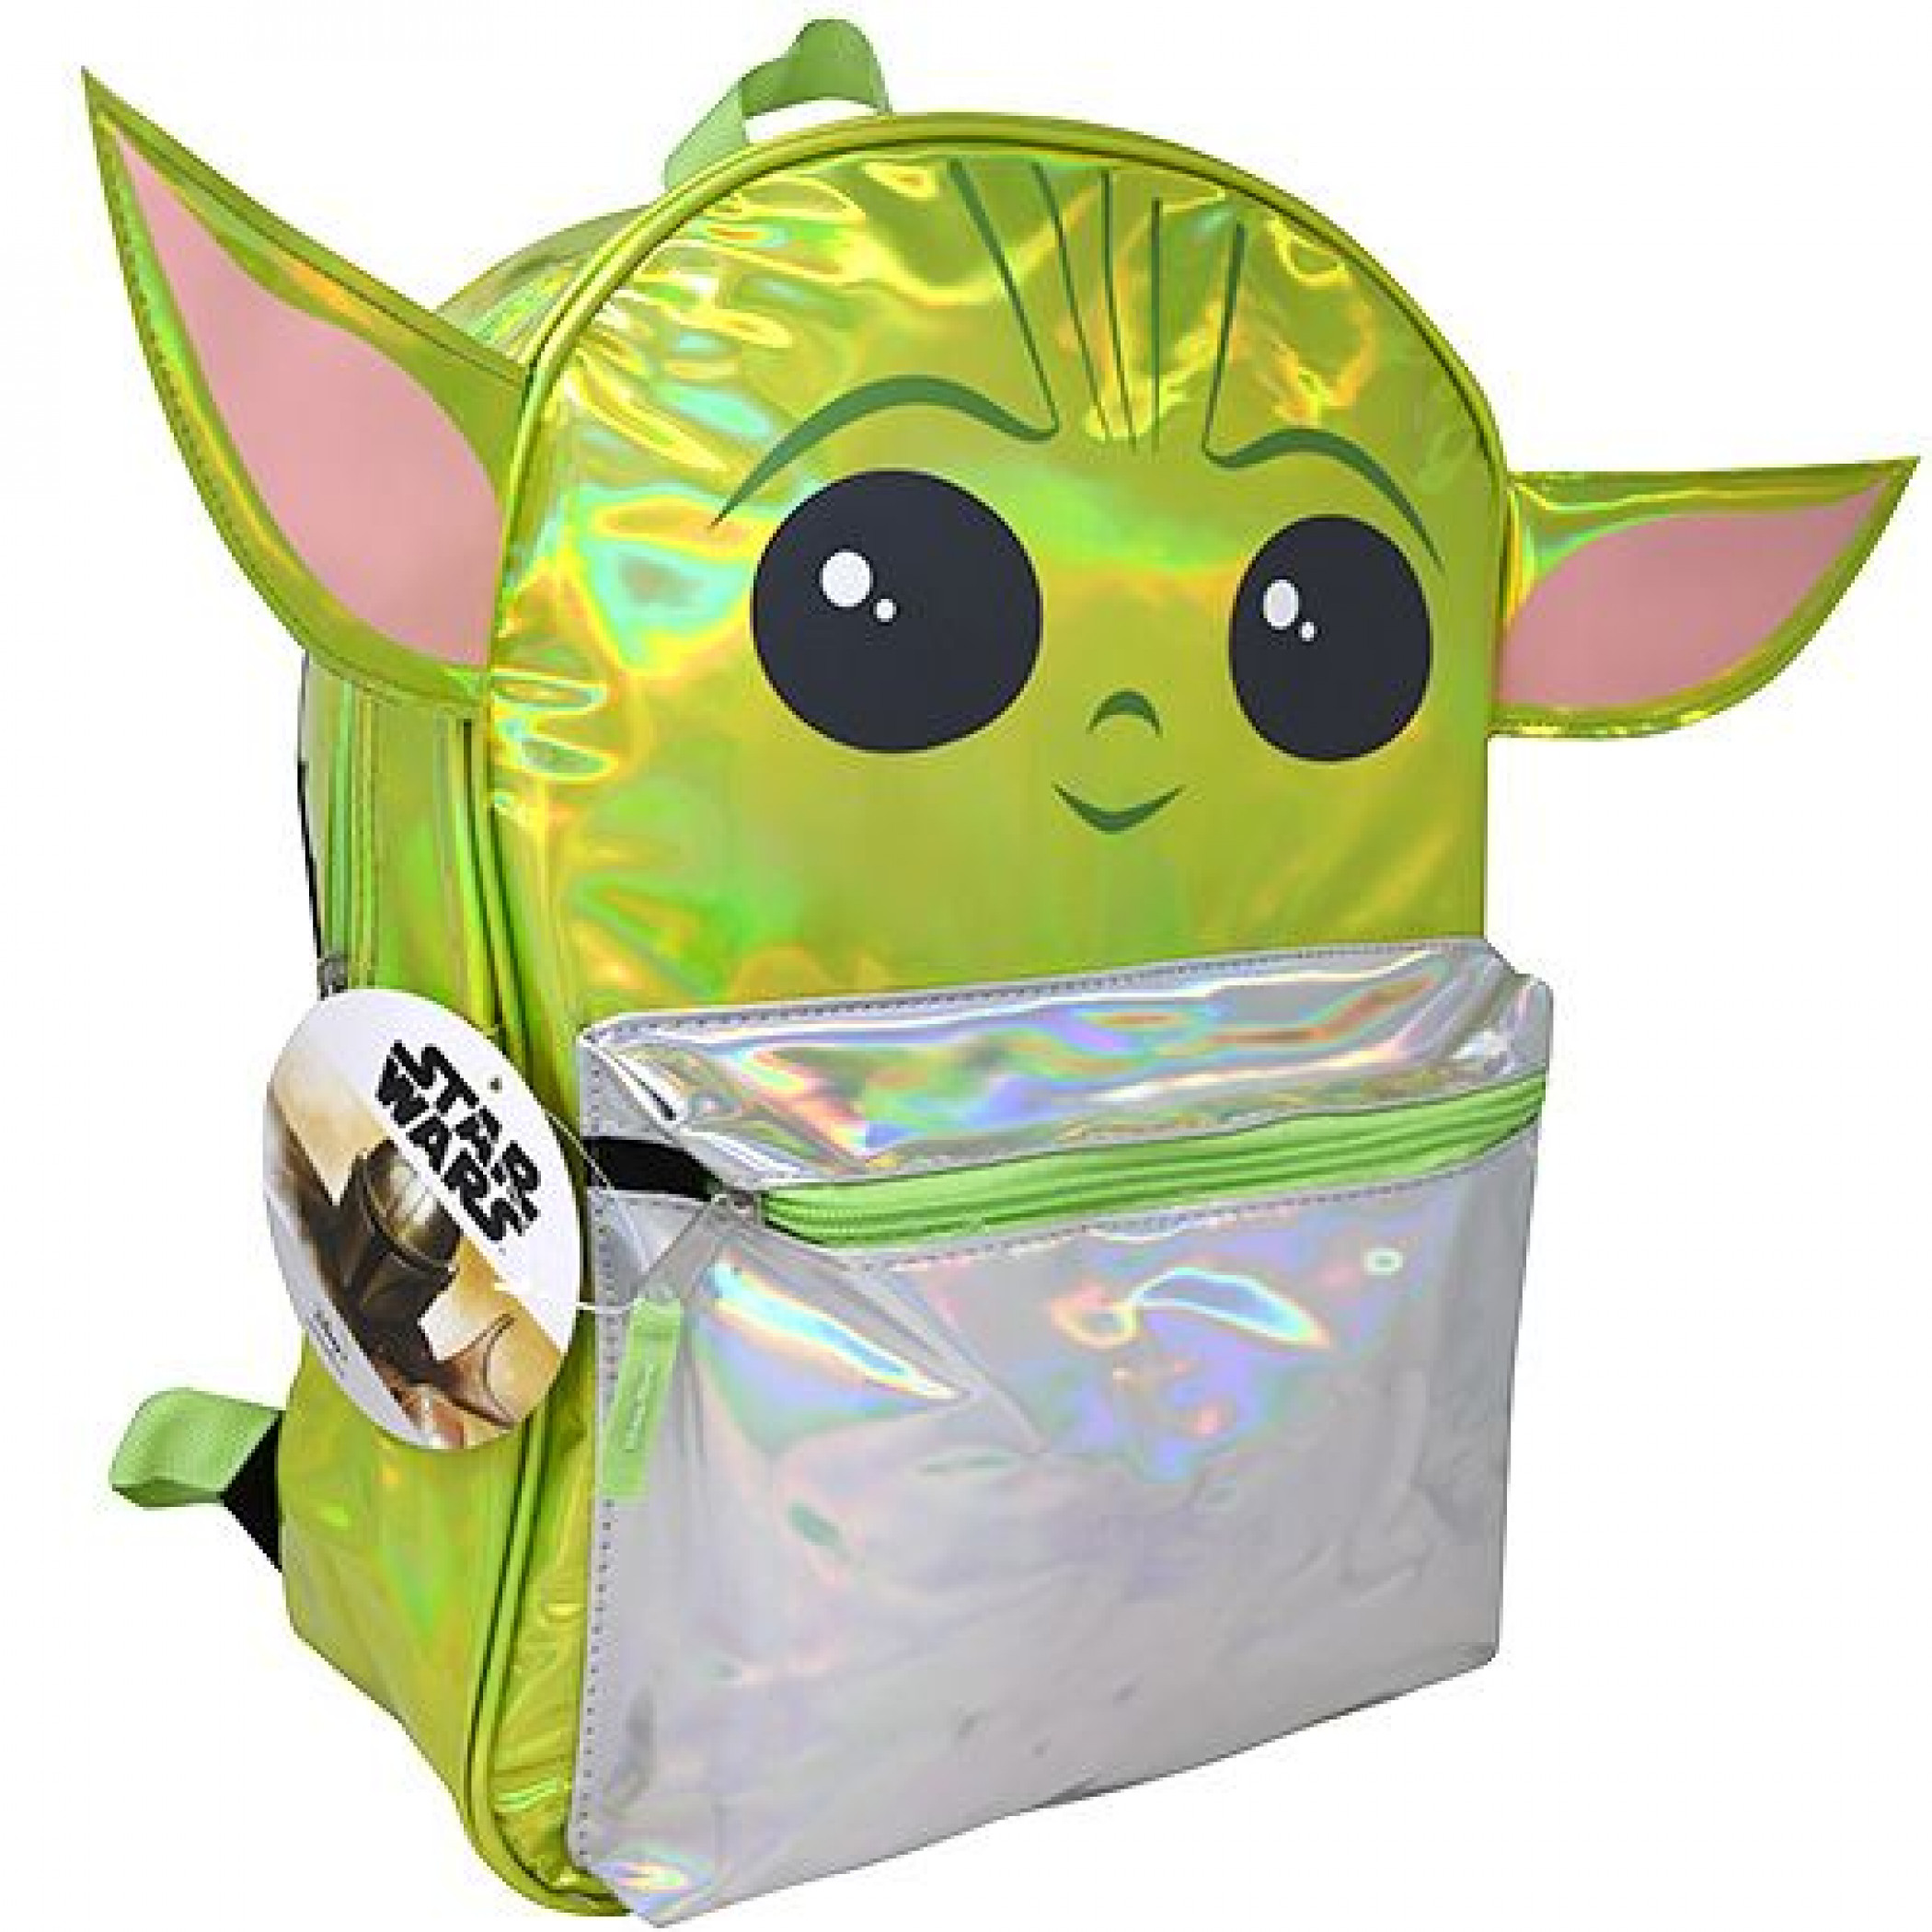 Star Wars The Child The Mandalorian 16" Backpack with Shaped Ears